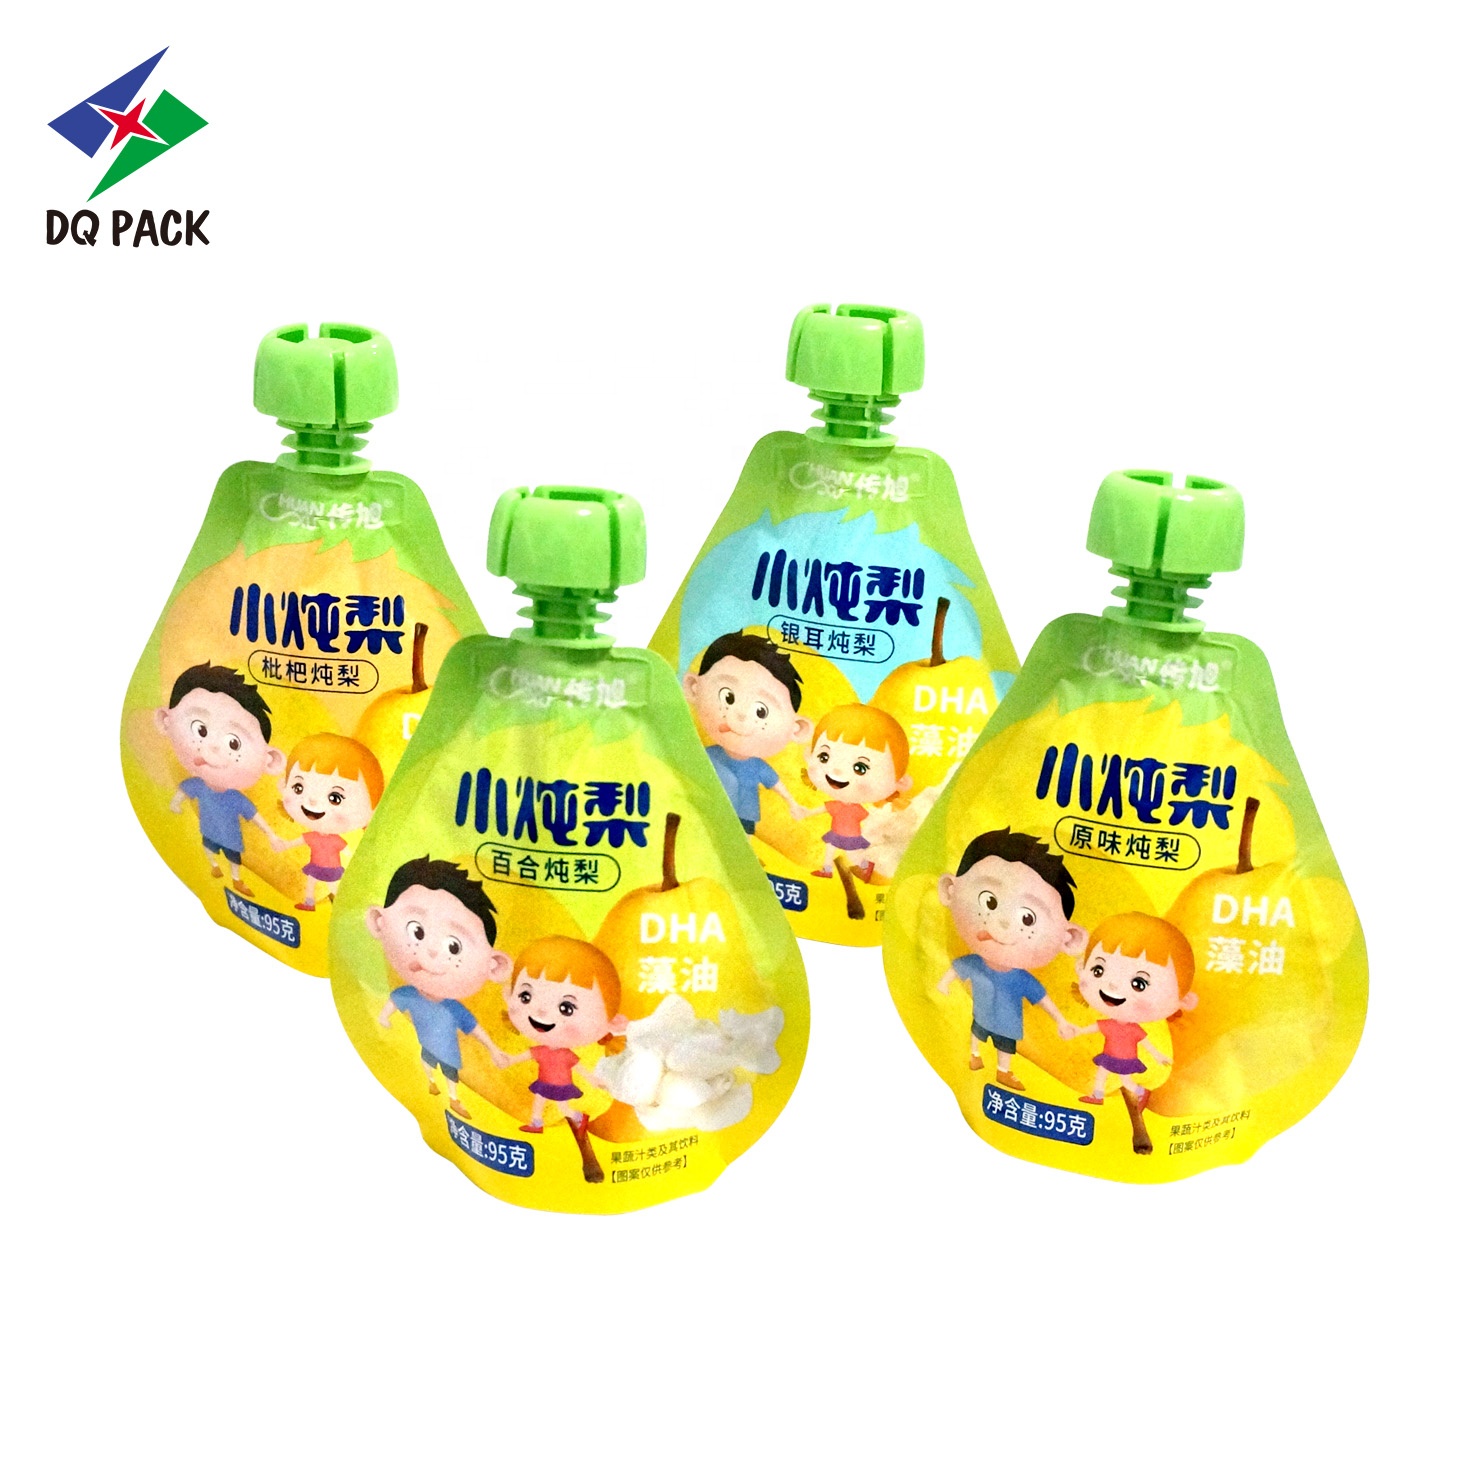 DQ PACK Custom Printed Stand up spout pouch doypack bag for liquid mango juice fruit puree packaging